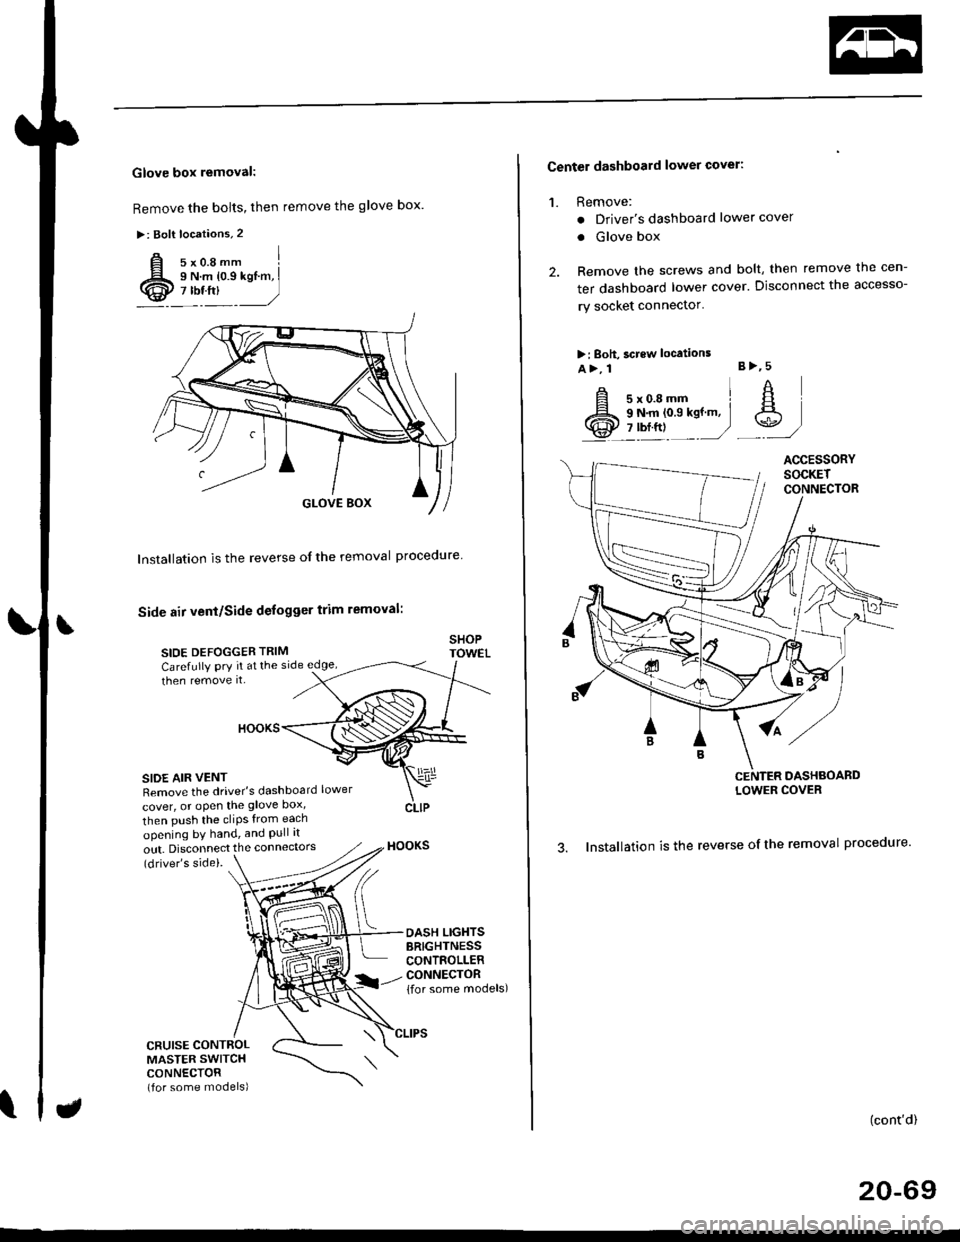 HONDA CIVIC 1996 6.G Workshop Manual Glove box removal:
Remove the bolts, then remove the glove box.
>: Bolt locations,2
Installation is the reverse of the removal proceoure
Side air vent/Side defogger trim removal:
SIOE DEFOGGER TRIMSHO